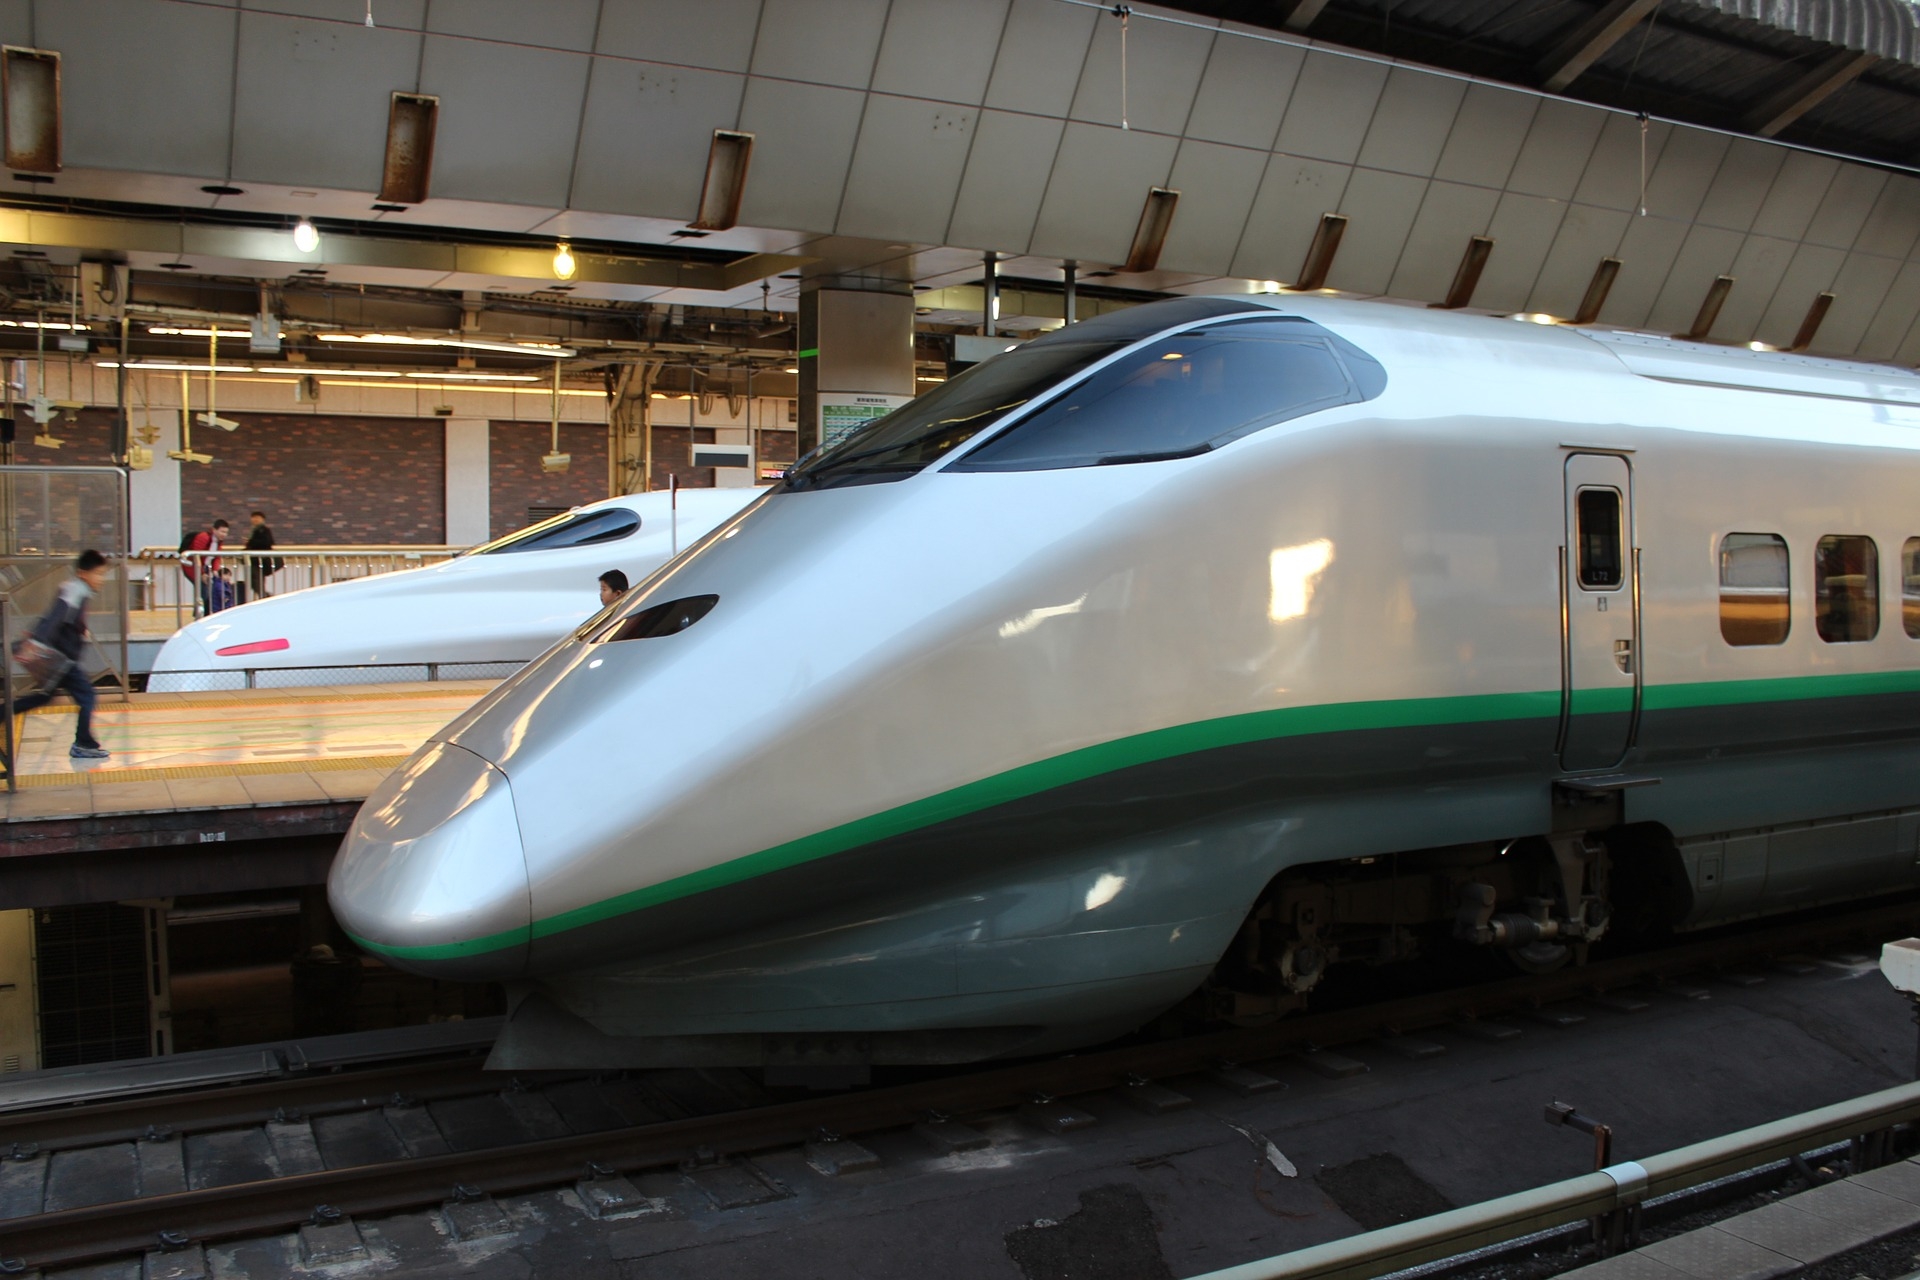 7 companies showed interest for tunnel construction for Bullet train